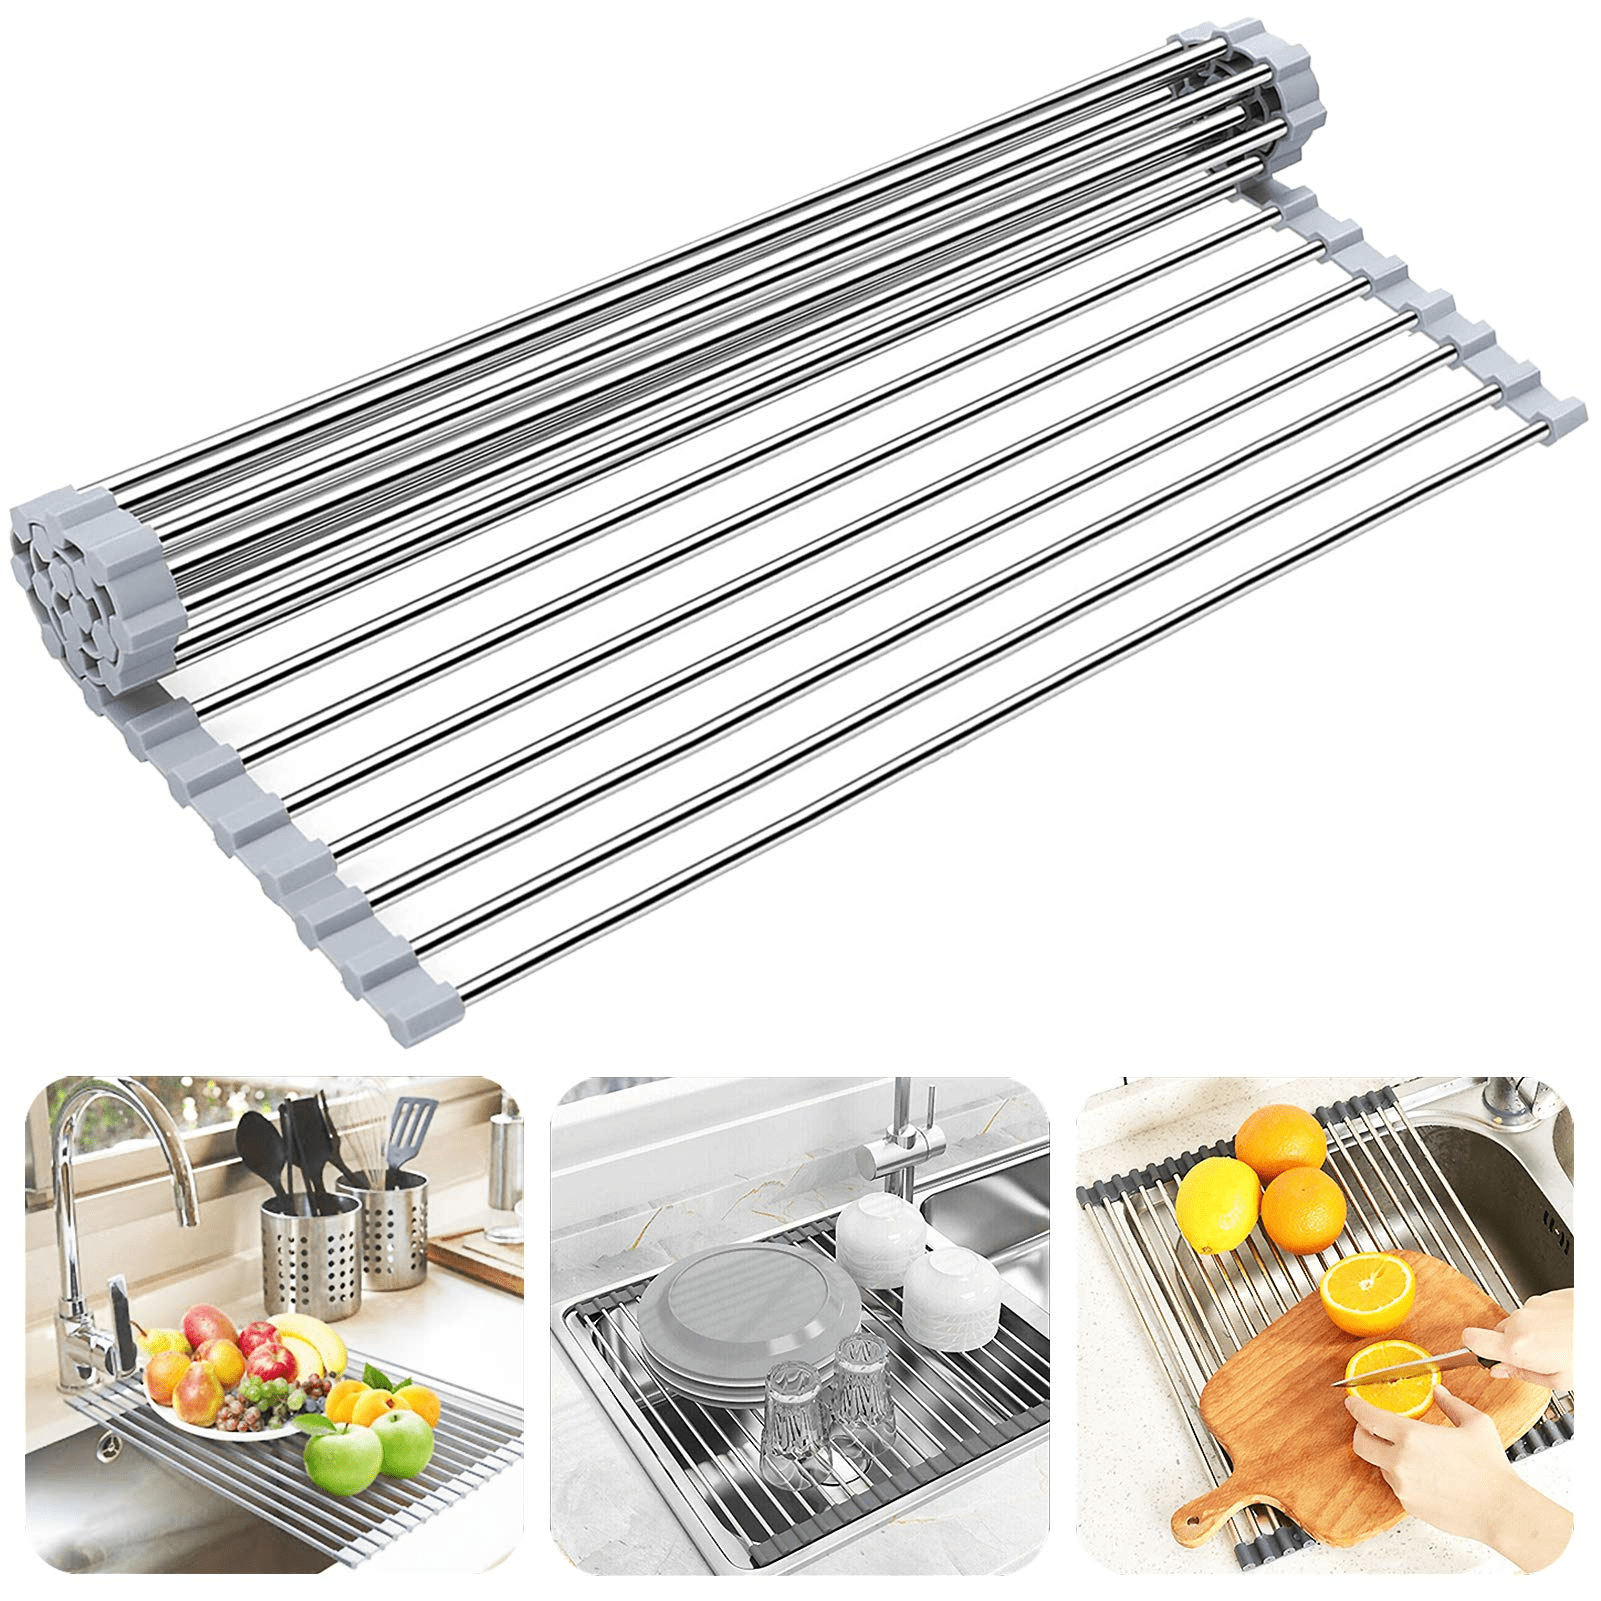 G-TING Dish Drying Rack 17.6 x 16, Over Sink Roll Up Large Dish Drainers  Rack, Multipurpose Foldable Kitchen Sink Rack Mat Stainless Steel with